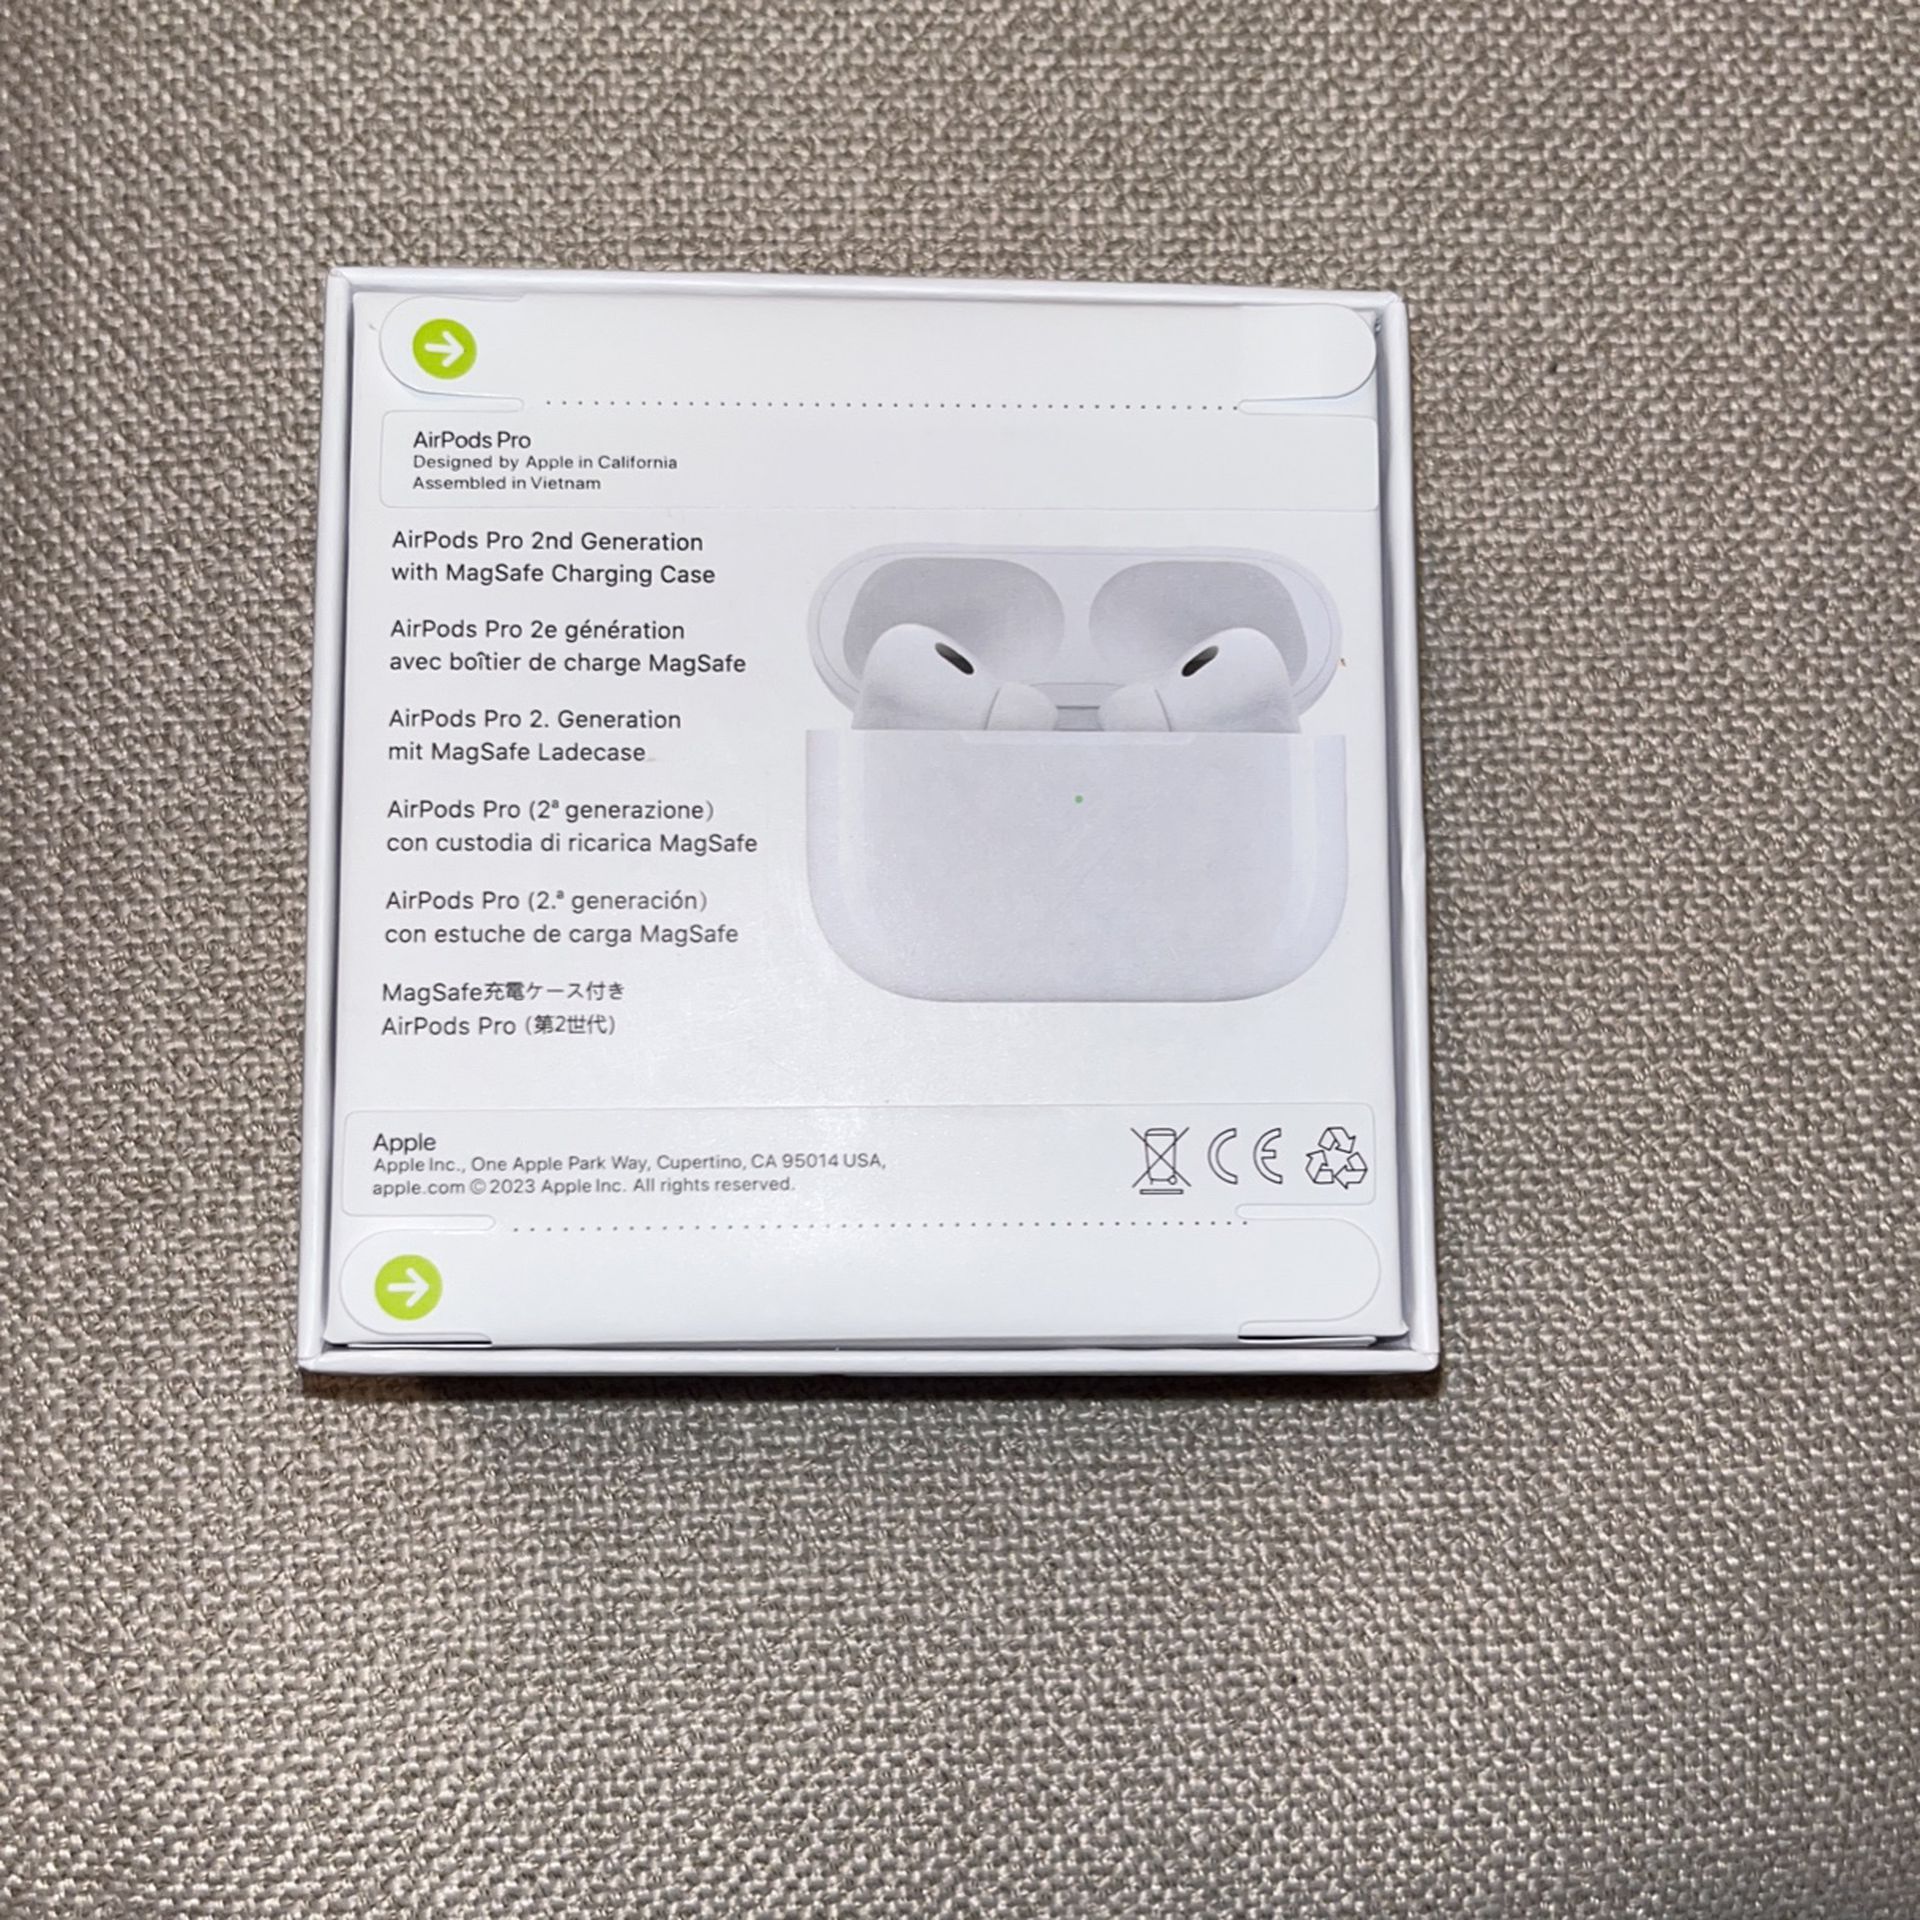 AirPods Pro 2nd Generation for Sale in Orlando, FL - OfferUp